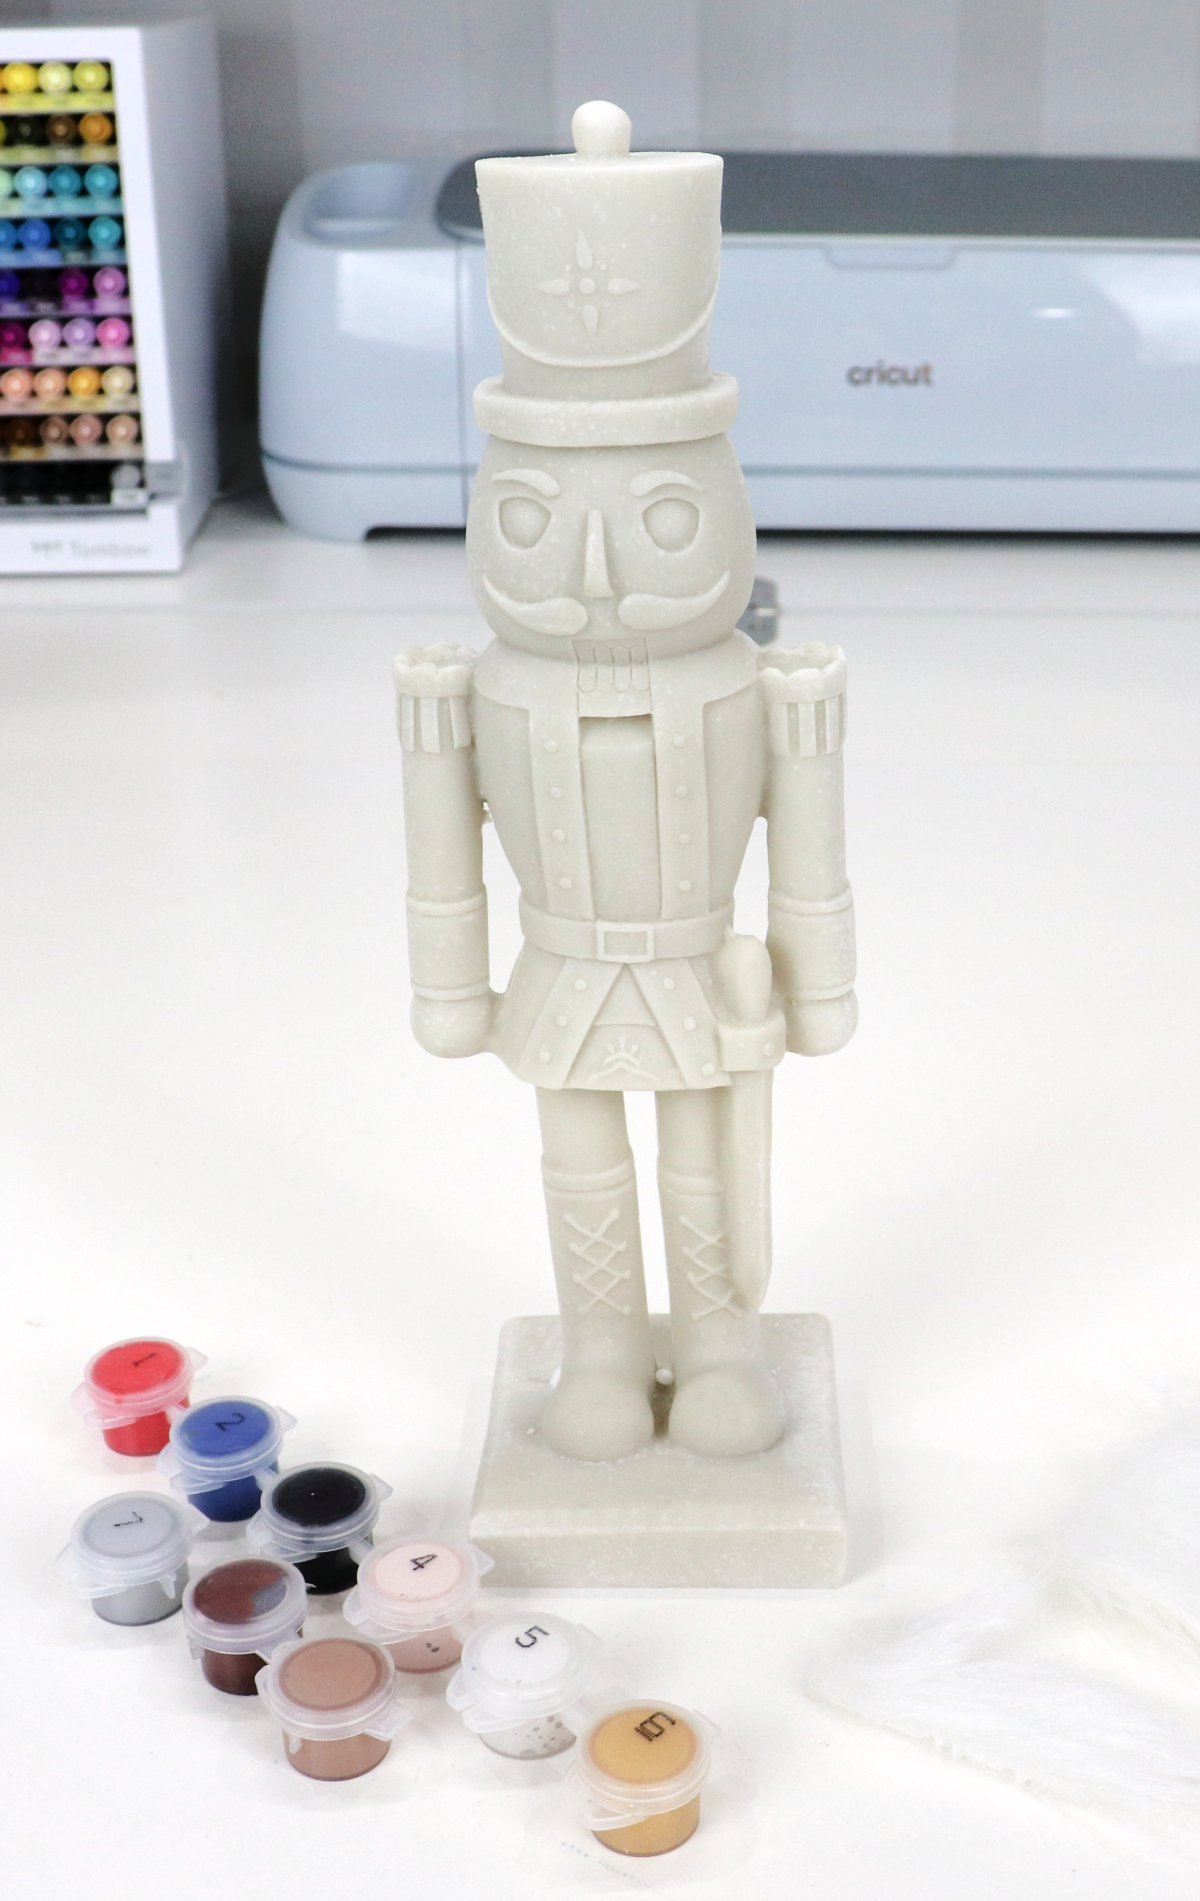 Image contains an unpainted nutcracker figurine and nine colors of paints in small tubs.